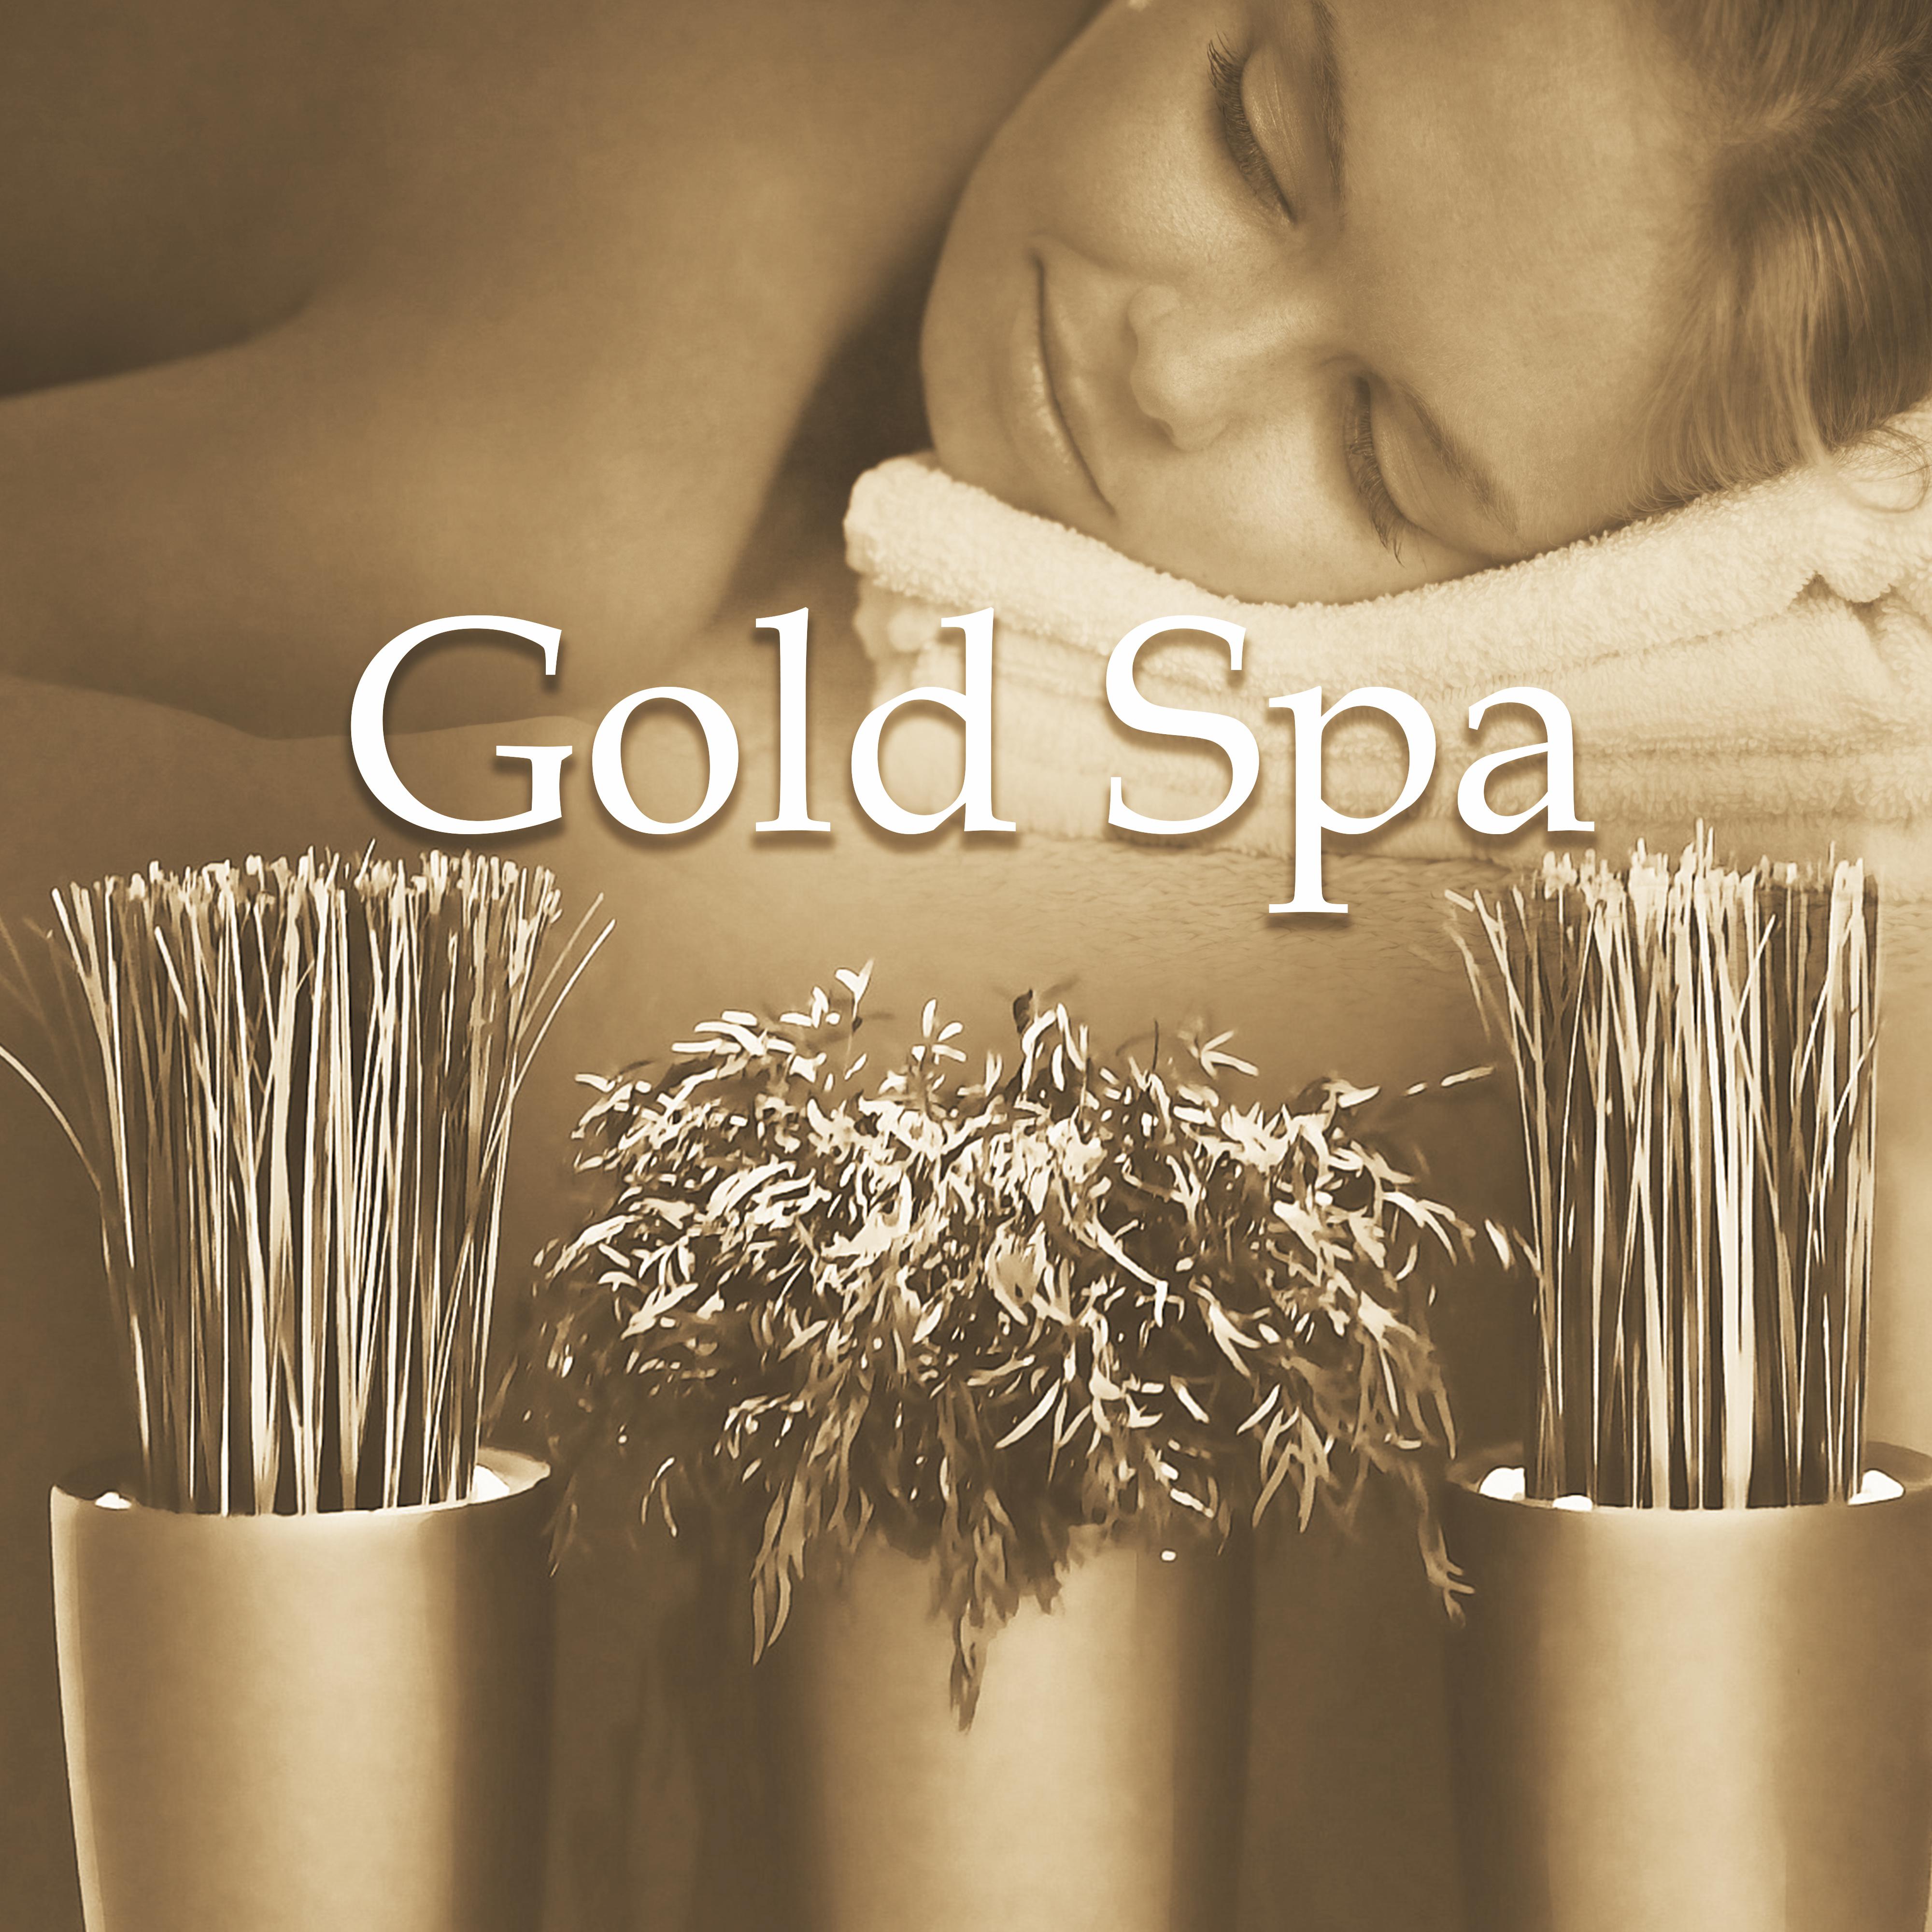 Gold Spa  Sounds of Sea, Soft Music for Relaxation, Stress Relief, Asian Music, Relaxing Therapy for Wellness, Nature Sounds, Zen, Deep Massage